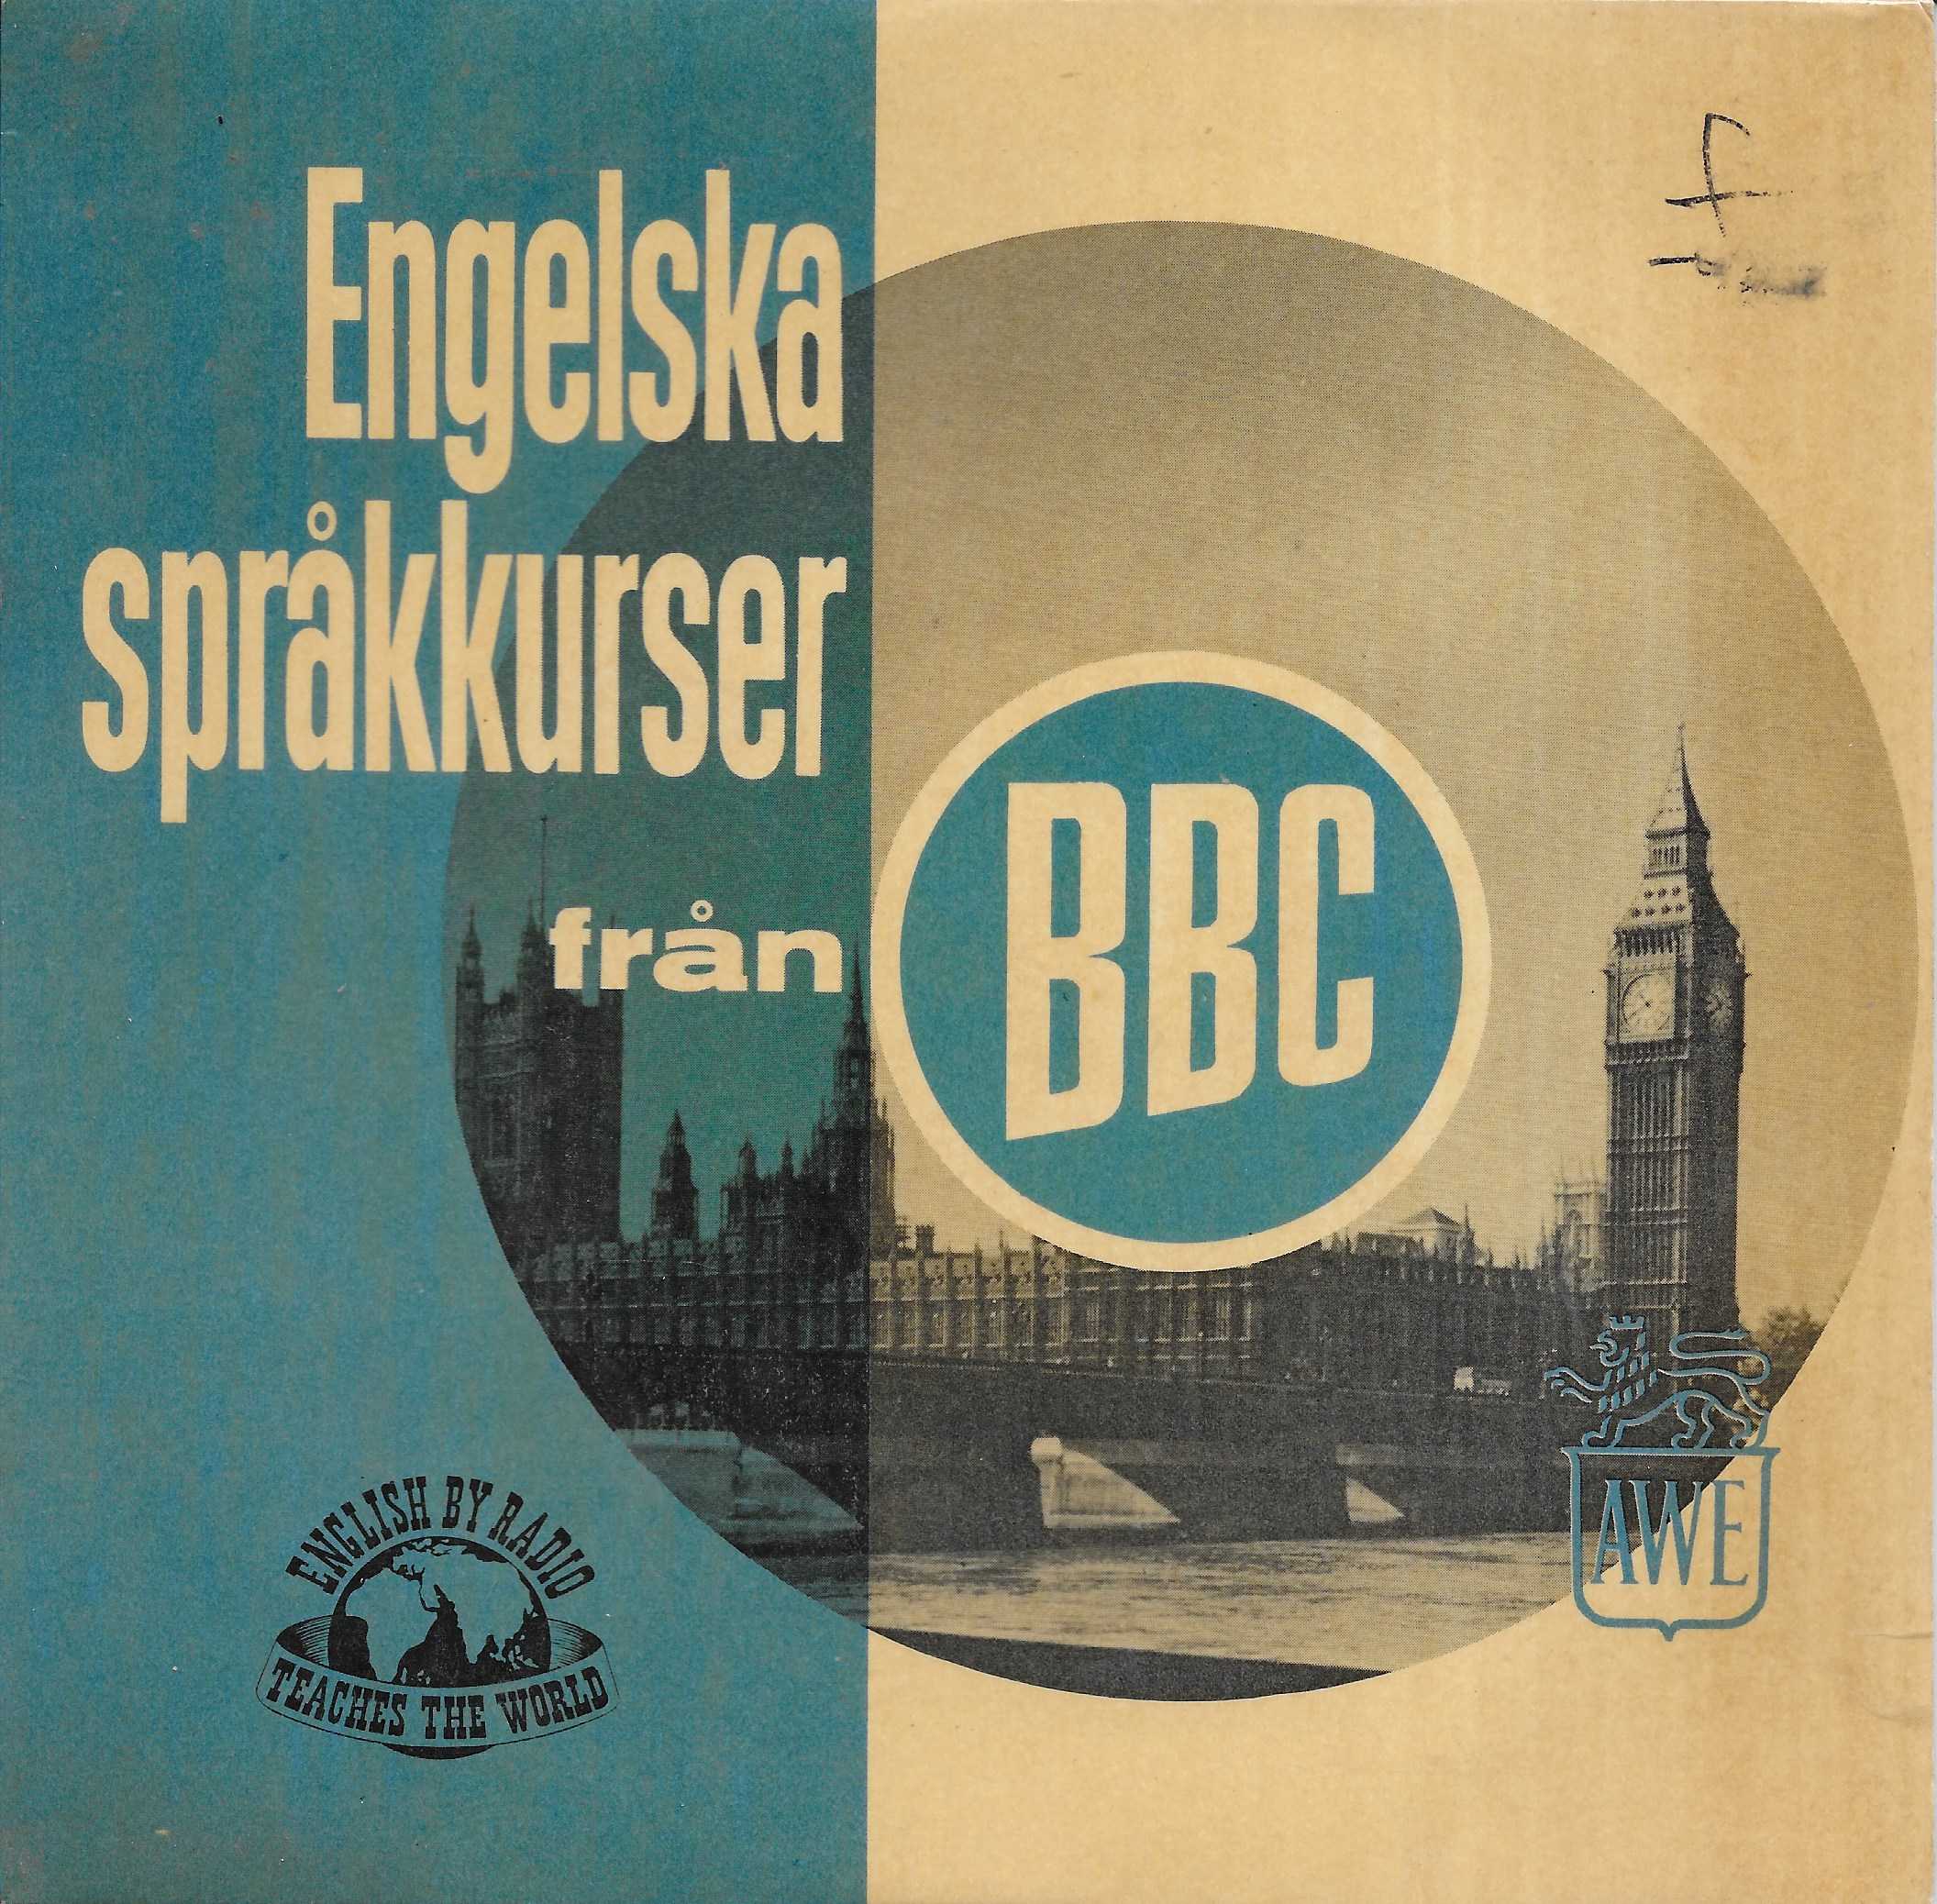 Picture of SELA 352 Provskiva by artist Unknown from the BBC records and Tapes library